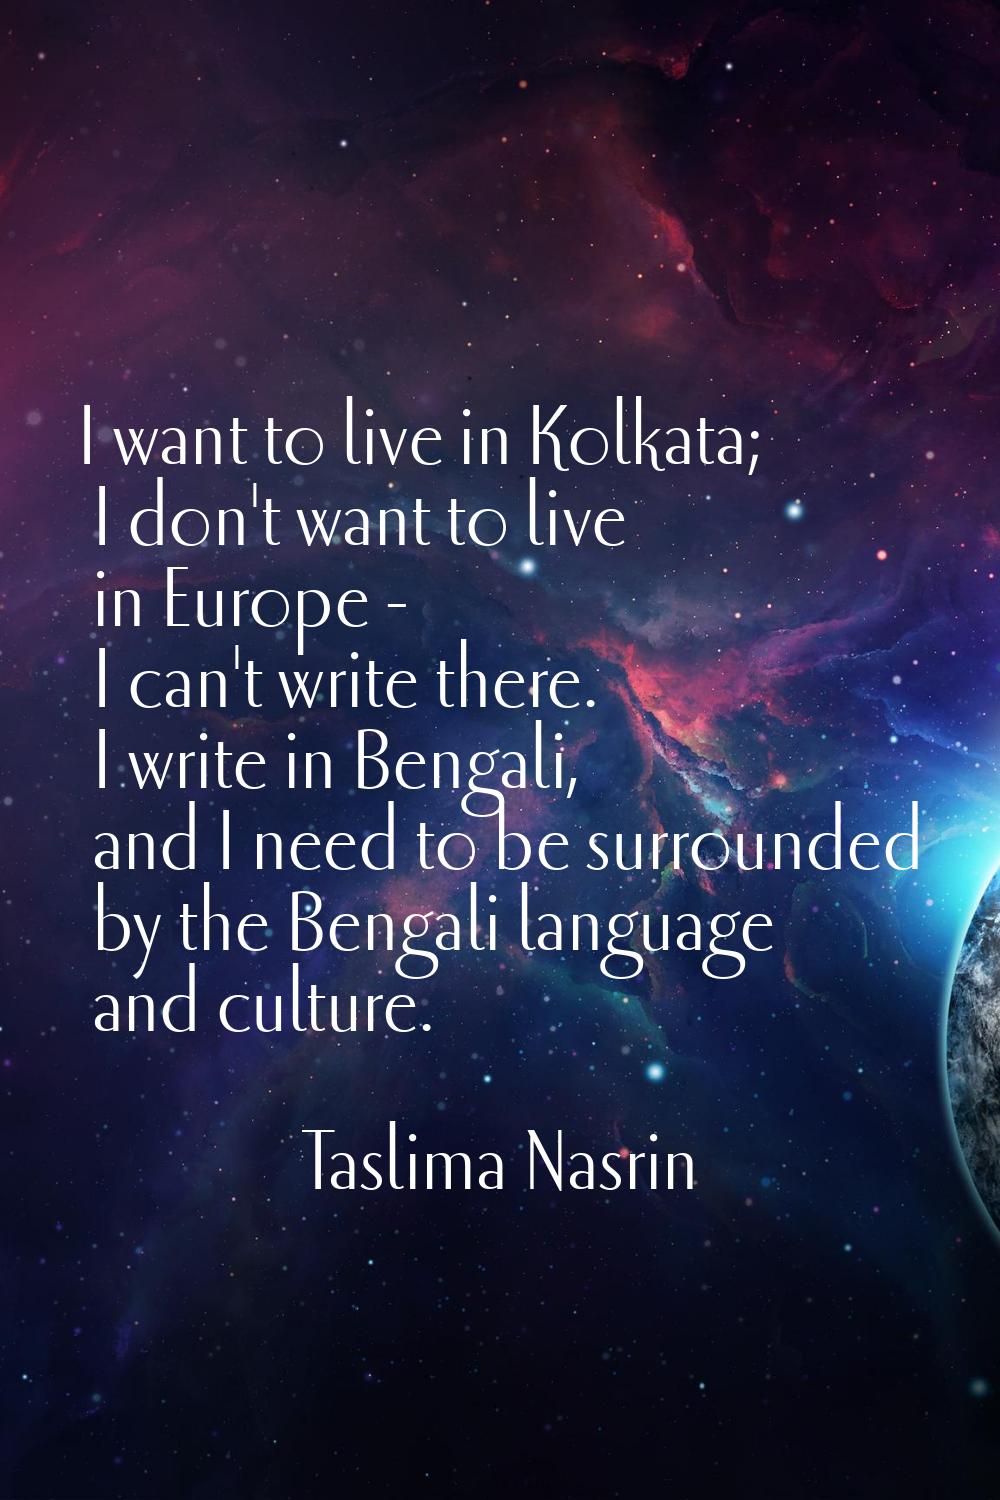 I want to live in Kolkata; I don't want to live in Europe - I can't write there. I write in Bengali